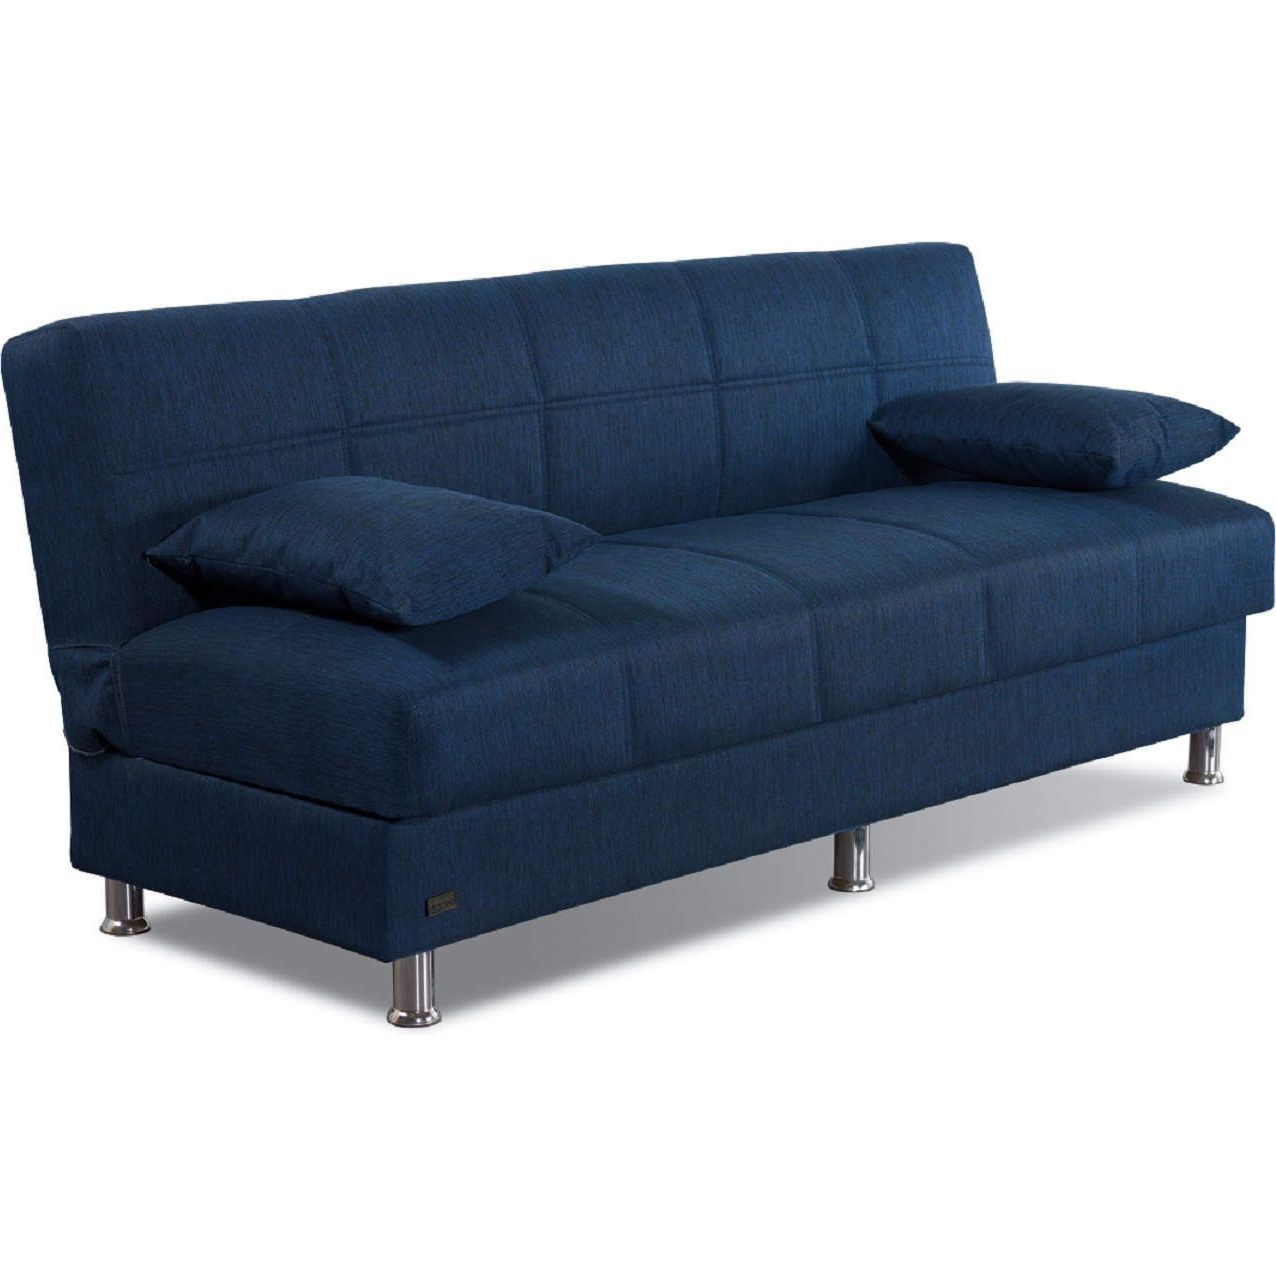 Famous Empire Furniture Sb London 2019 London Sleeper Sofa Tufted Navy Blue Intended For Navy Sleeper Sofa Couches (View 11 of 15)